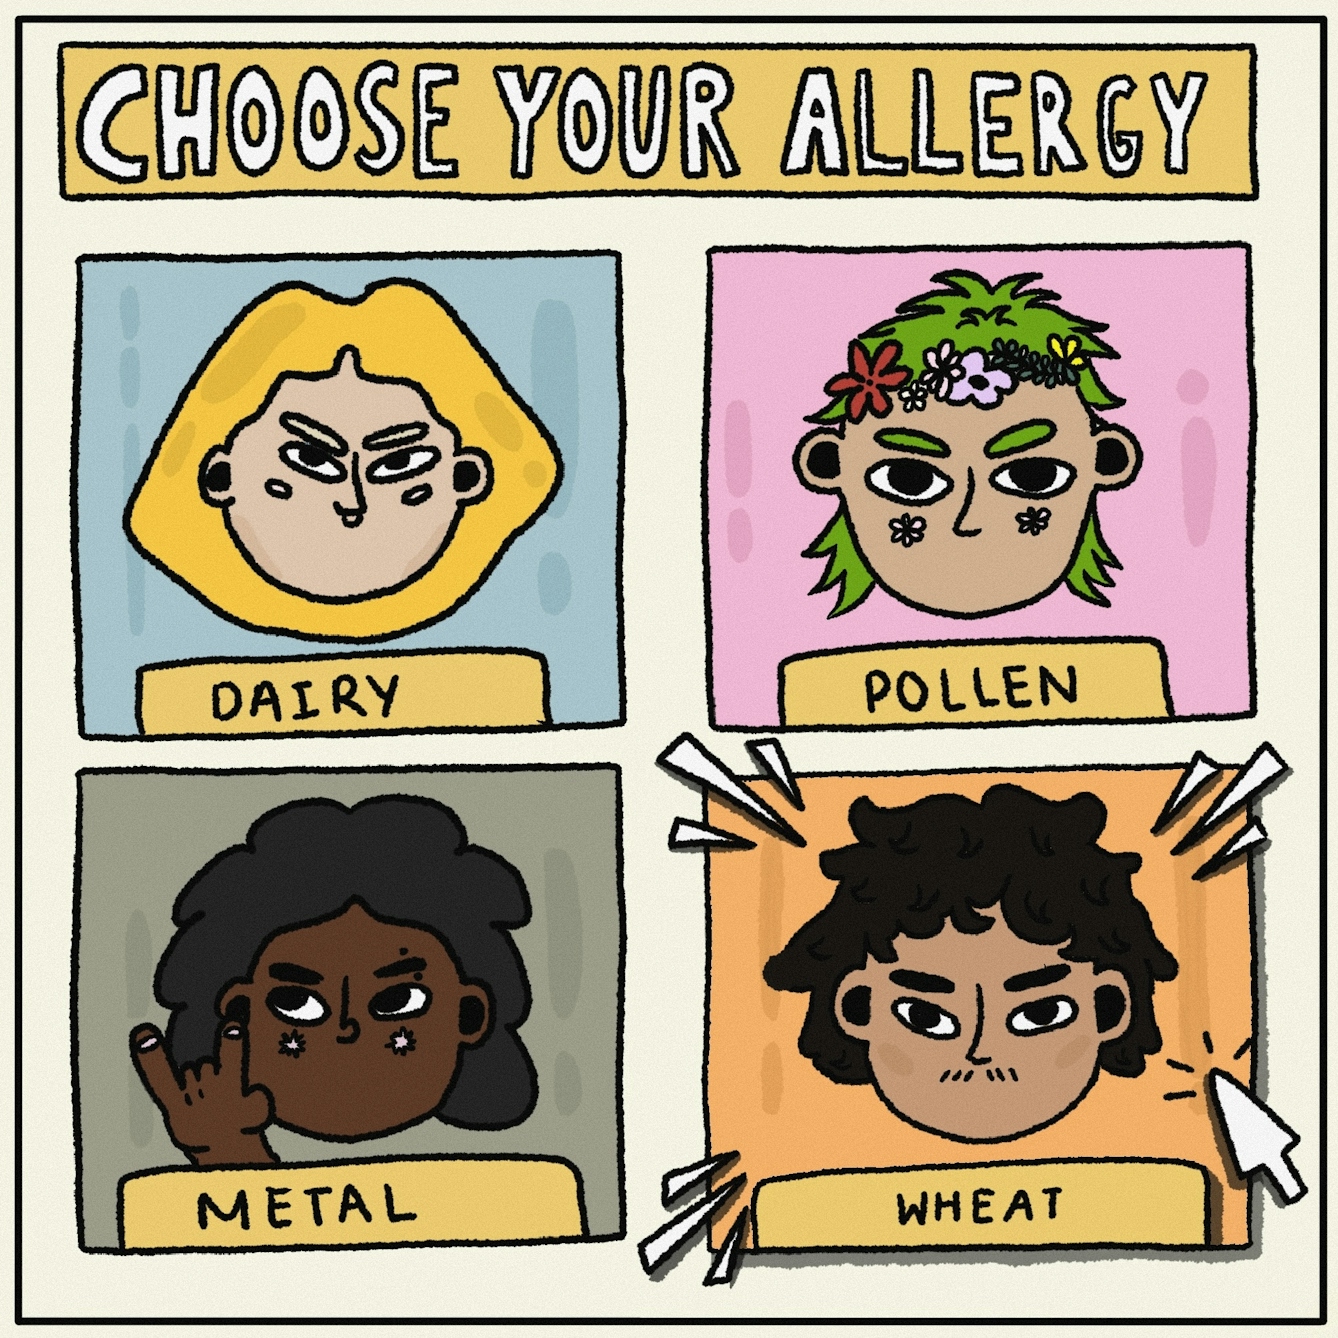 Panel 1 of a digitally drawn, four-panel comic titled ‘Gluten-free economy’. Text at the top reads “CHOOSE YOUR ALLERGY”. The box in the bottom right is labelled ‘WHEAT’ and, in it, is a character with brown skin and short black curly hair. A cartoon cursor is clicking over this box to signal this is the allergy you have chosen. There are three other boxes with characters that have not been chosen, labelled ‘DAIRY’, ‘POLLEN’ and ‘METAL’.